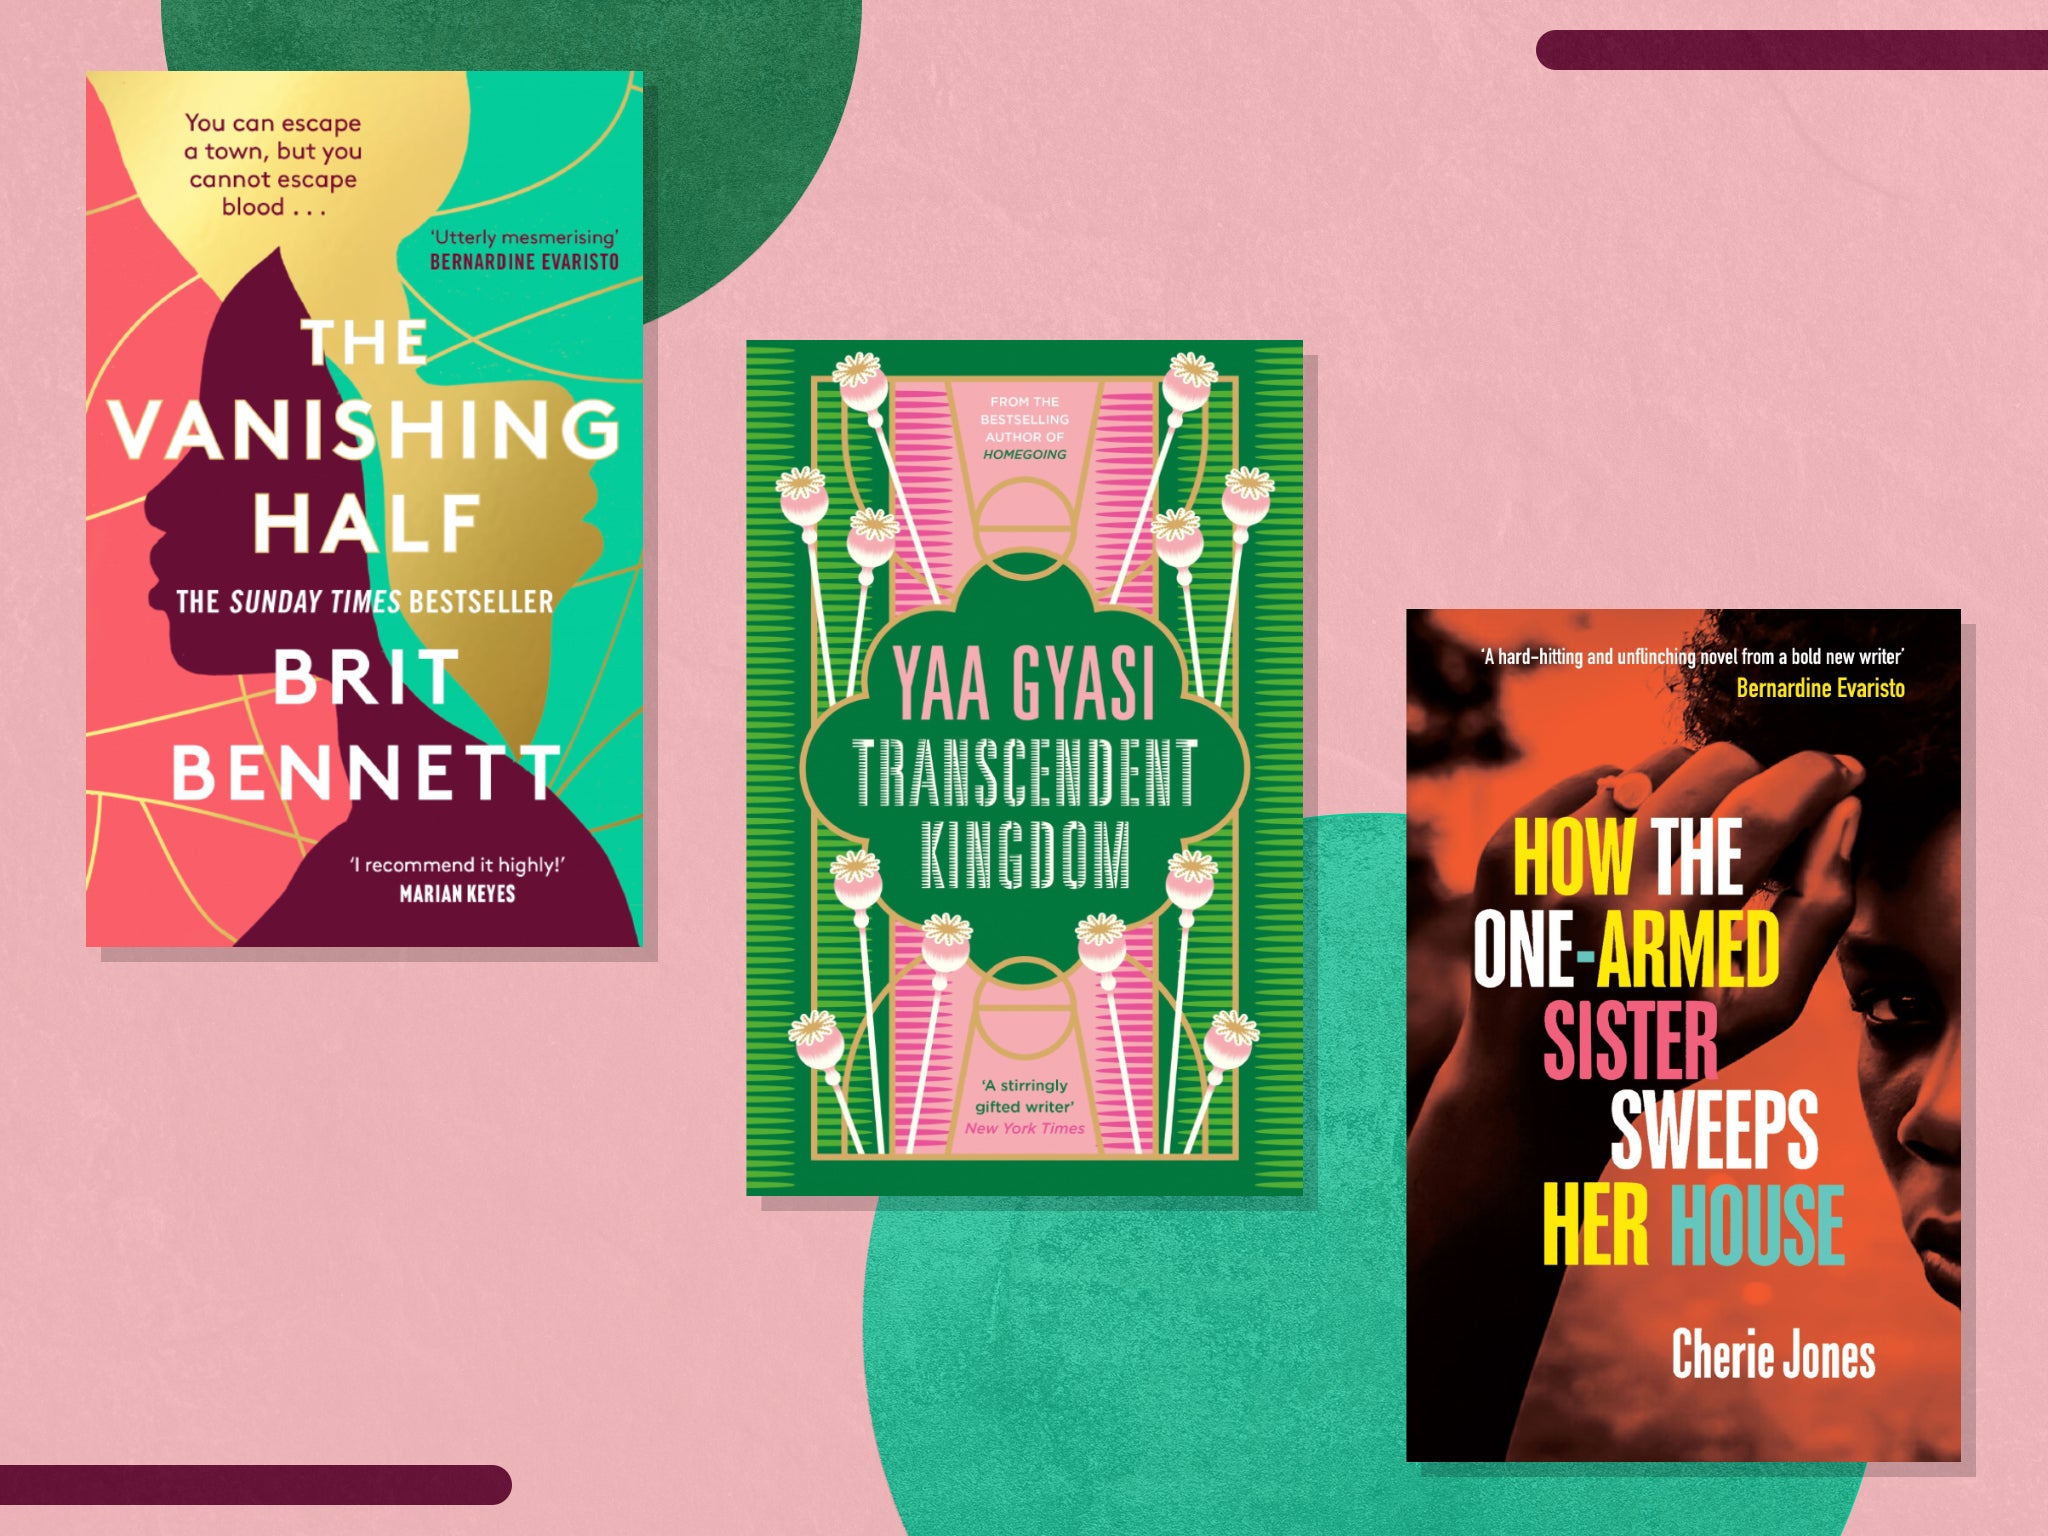 From ‘The Vanishing Half’ to ‘No One Is Talking About This’, add these titles to your reading list